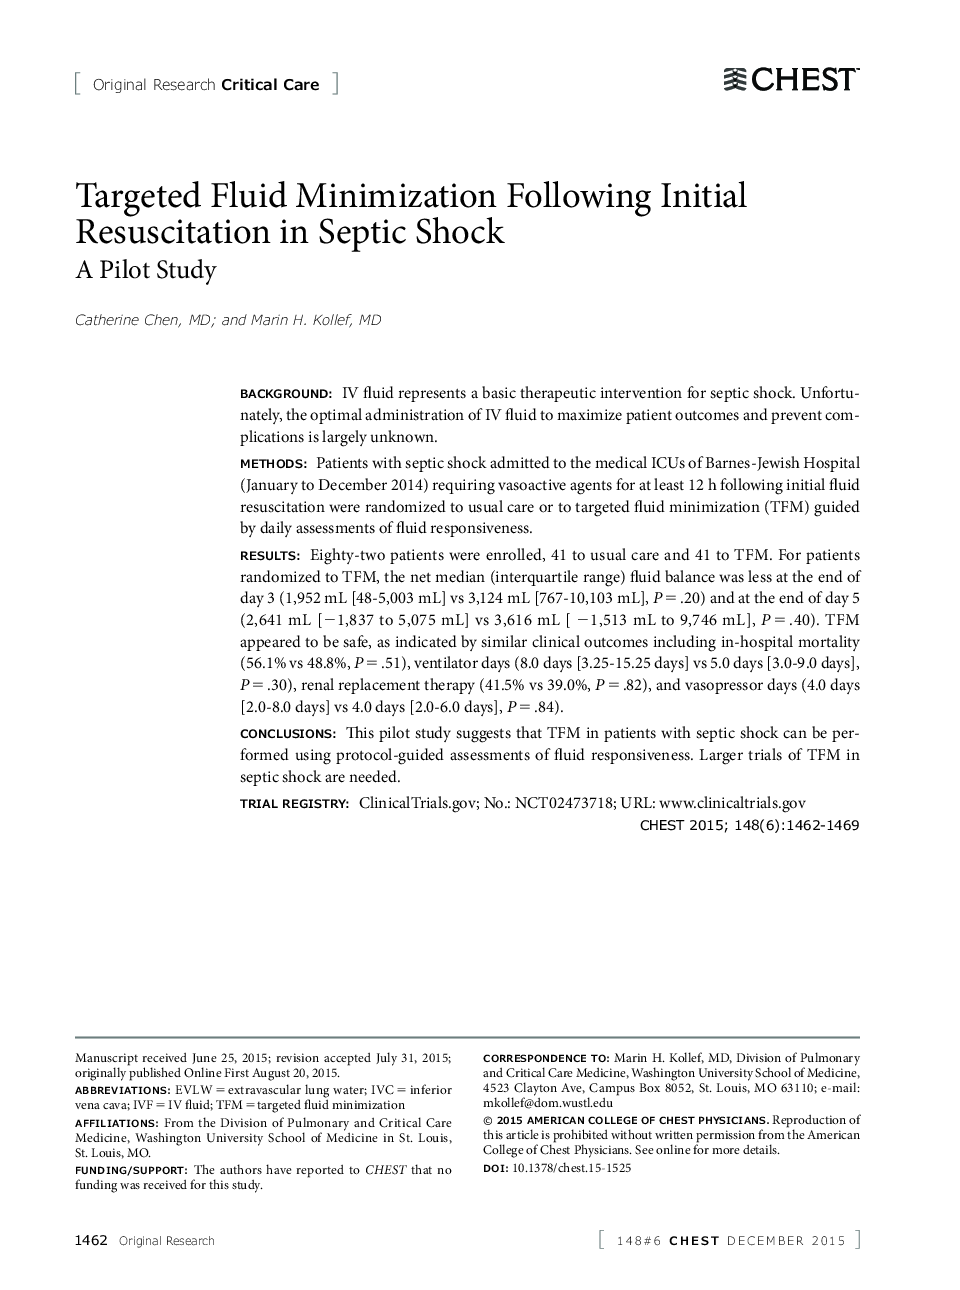 Targeted Fluid Minimization Following Initial Resuscitation in Septic Shock